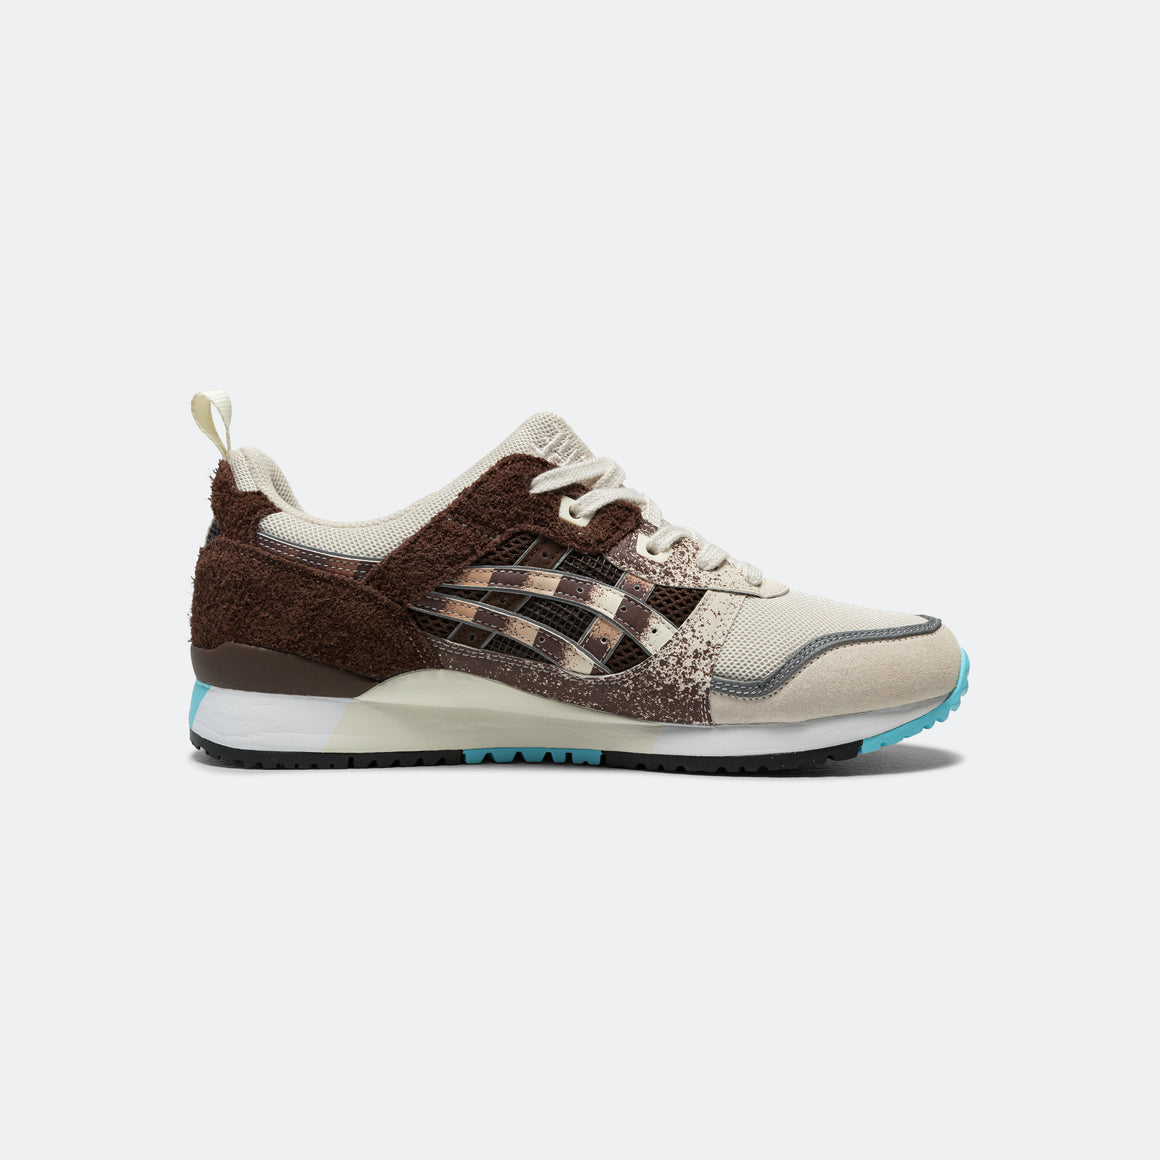 Asics - GEL-Lyte III × UP THERE - Cream/Dark Brown - UP THERE